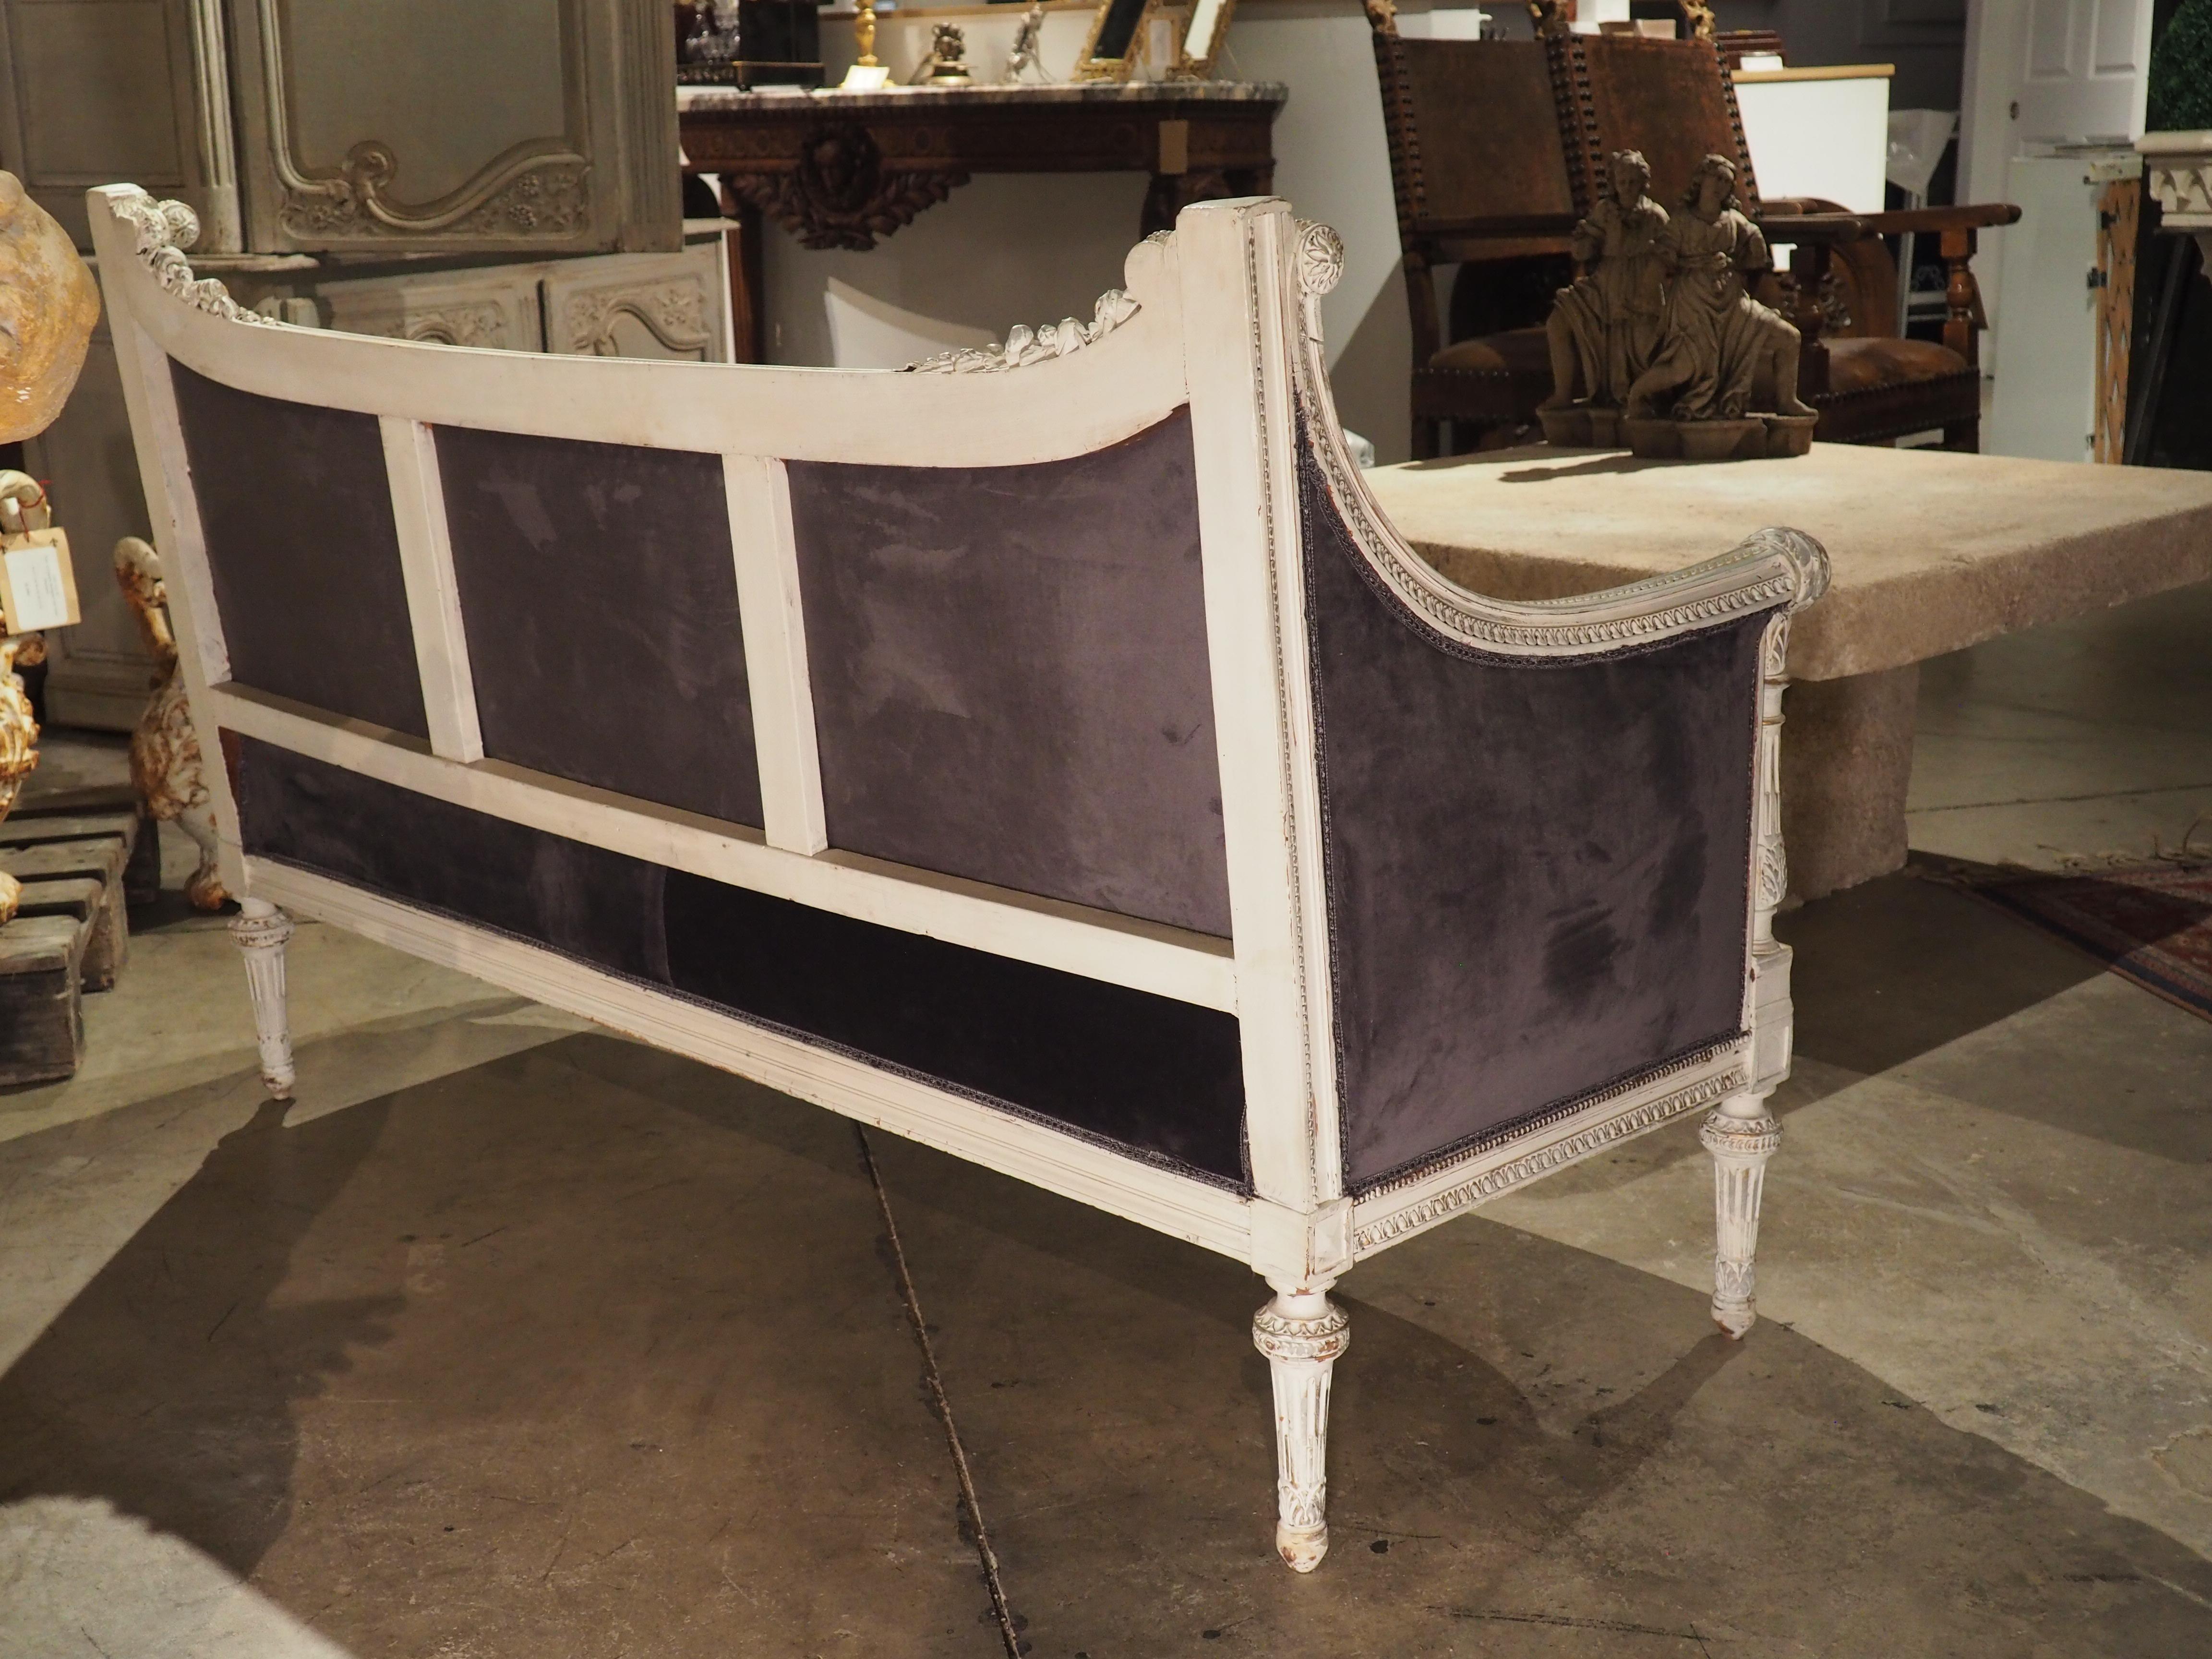 Hand-carved in the style of Louis XVI, this French canape features painted wood and a heather purple velvet upholstery with a gimp border. The highly detailed wood has been patinated in an antique white color with gold and silver rechampi subtly